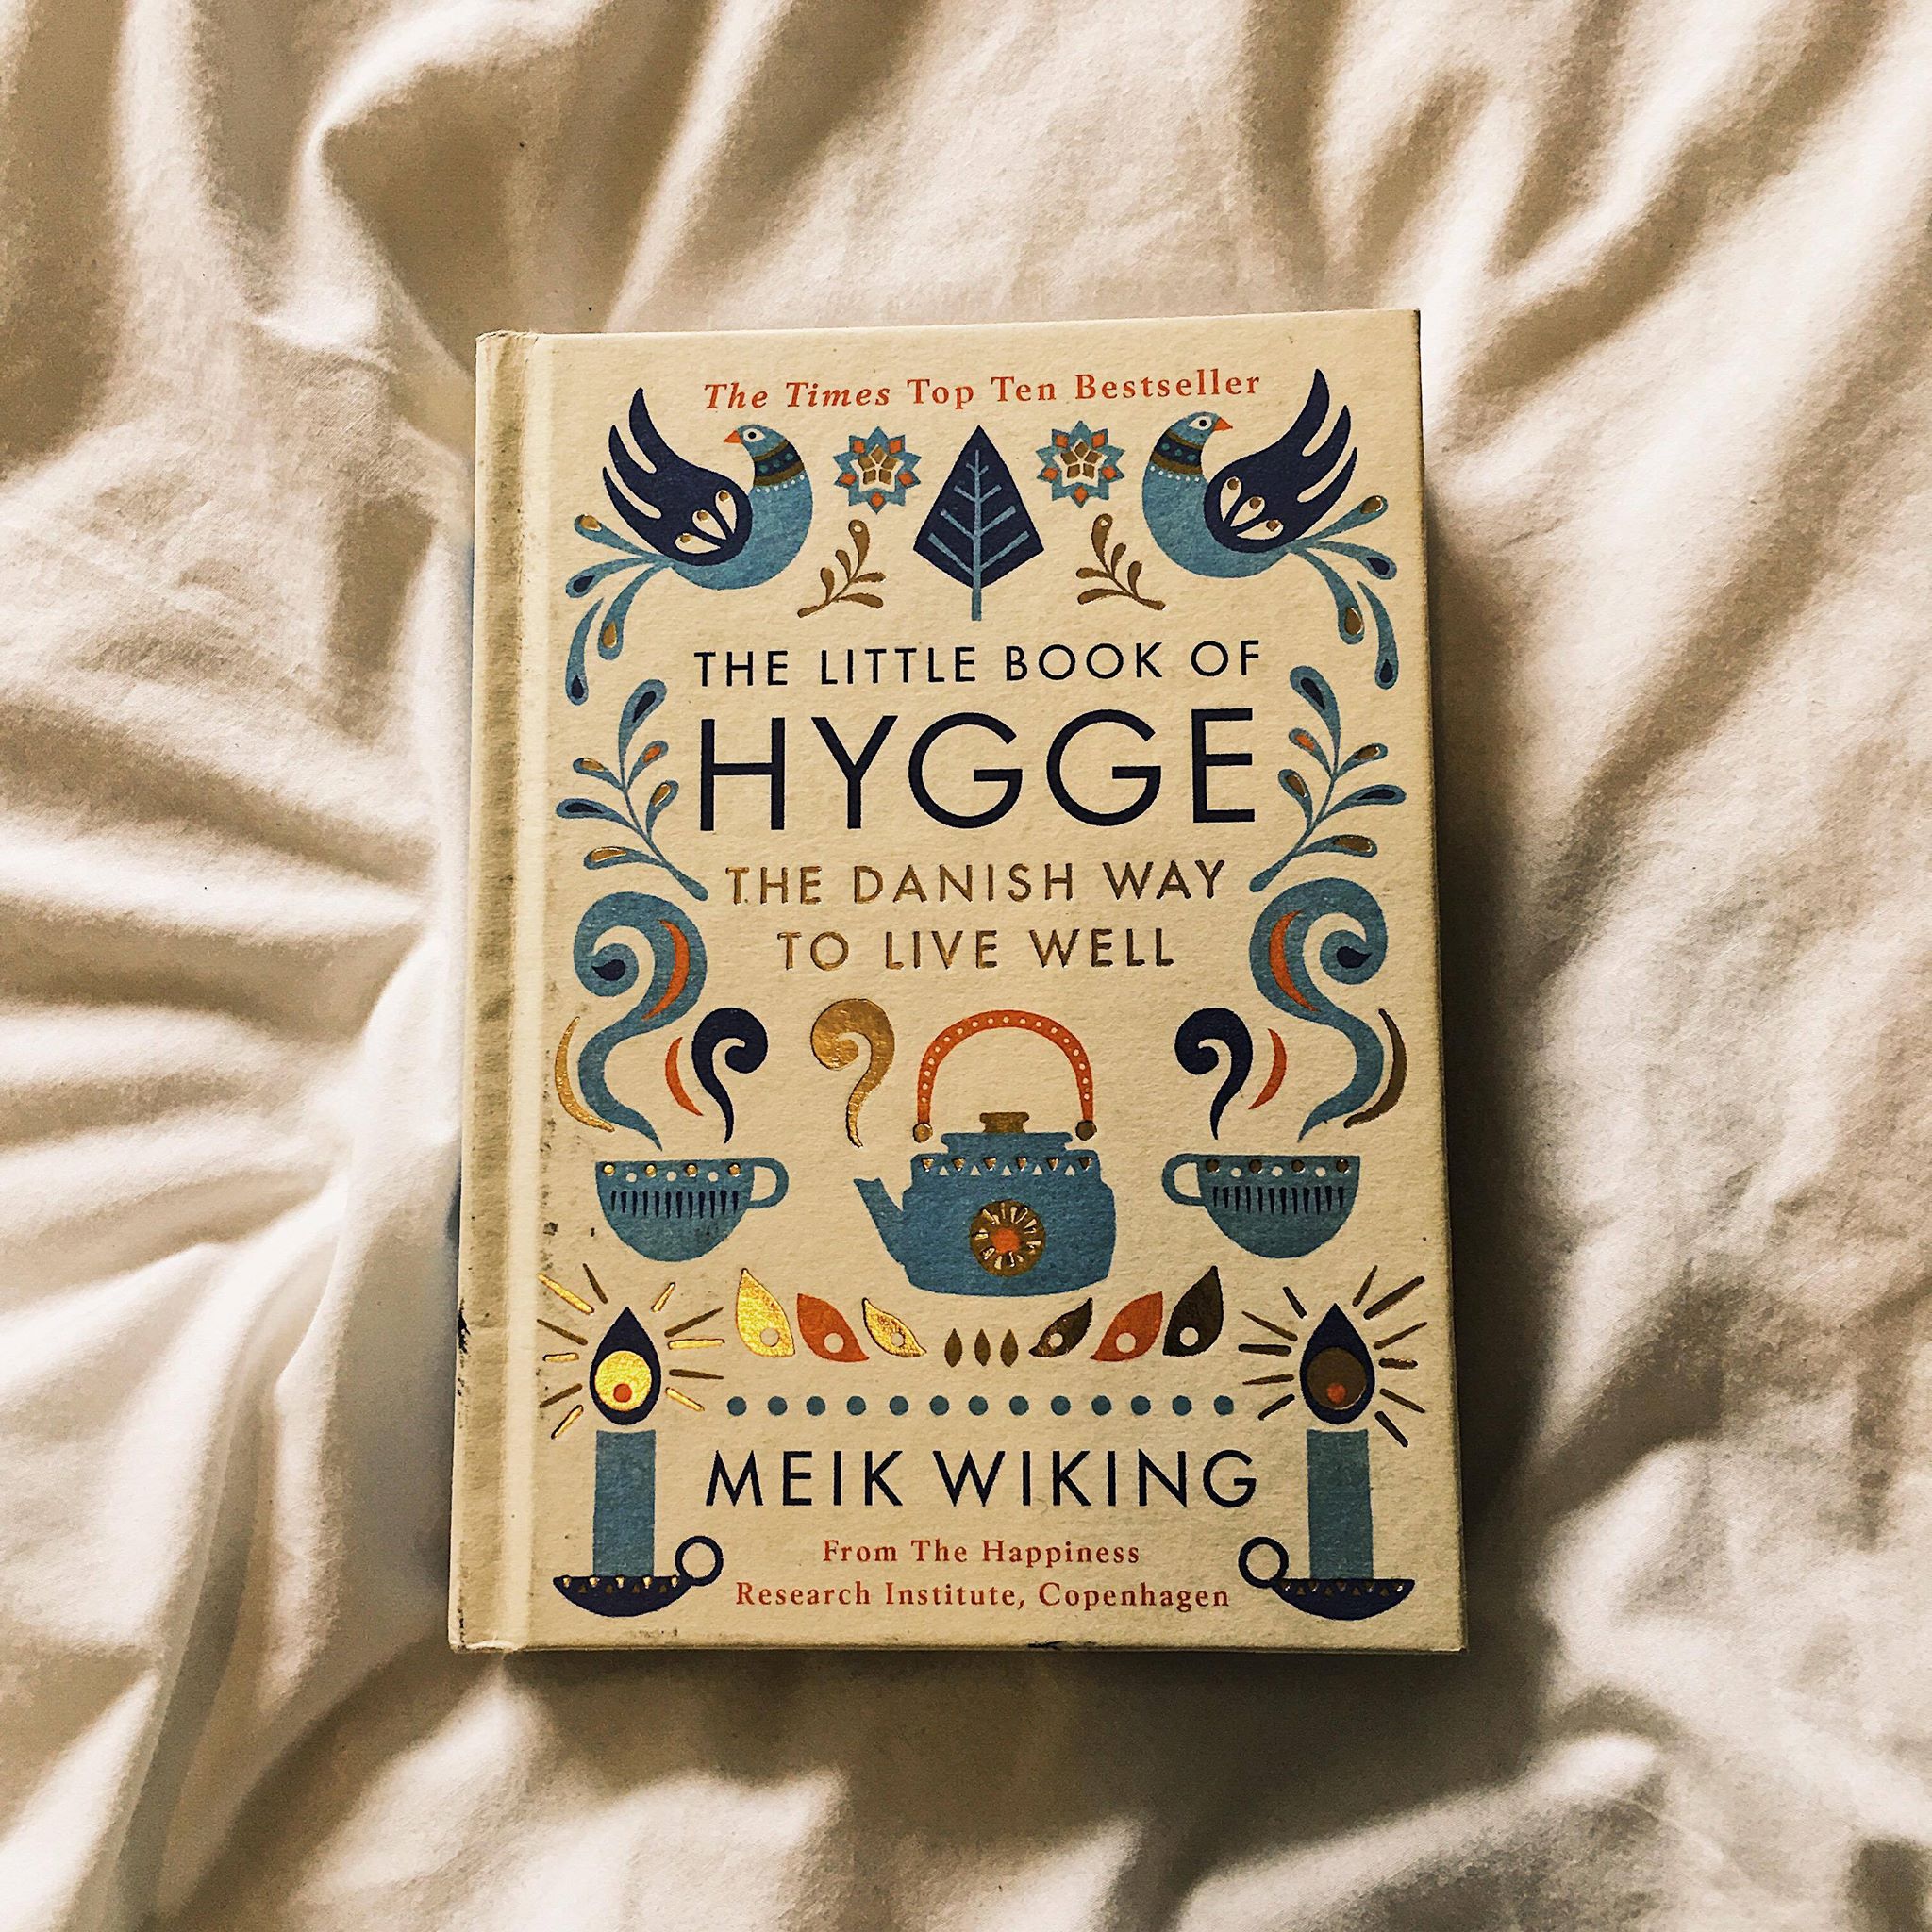 [Review] The Little Book of Hygge by Meik Wiking